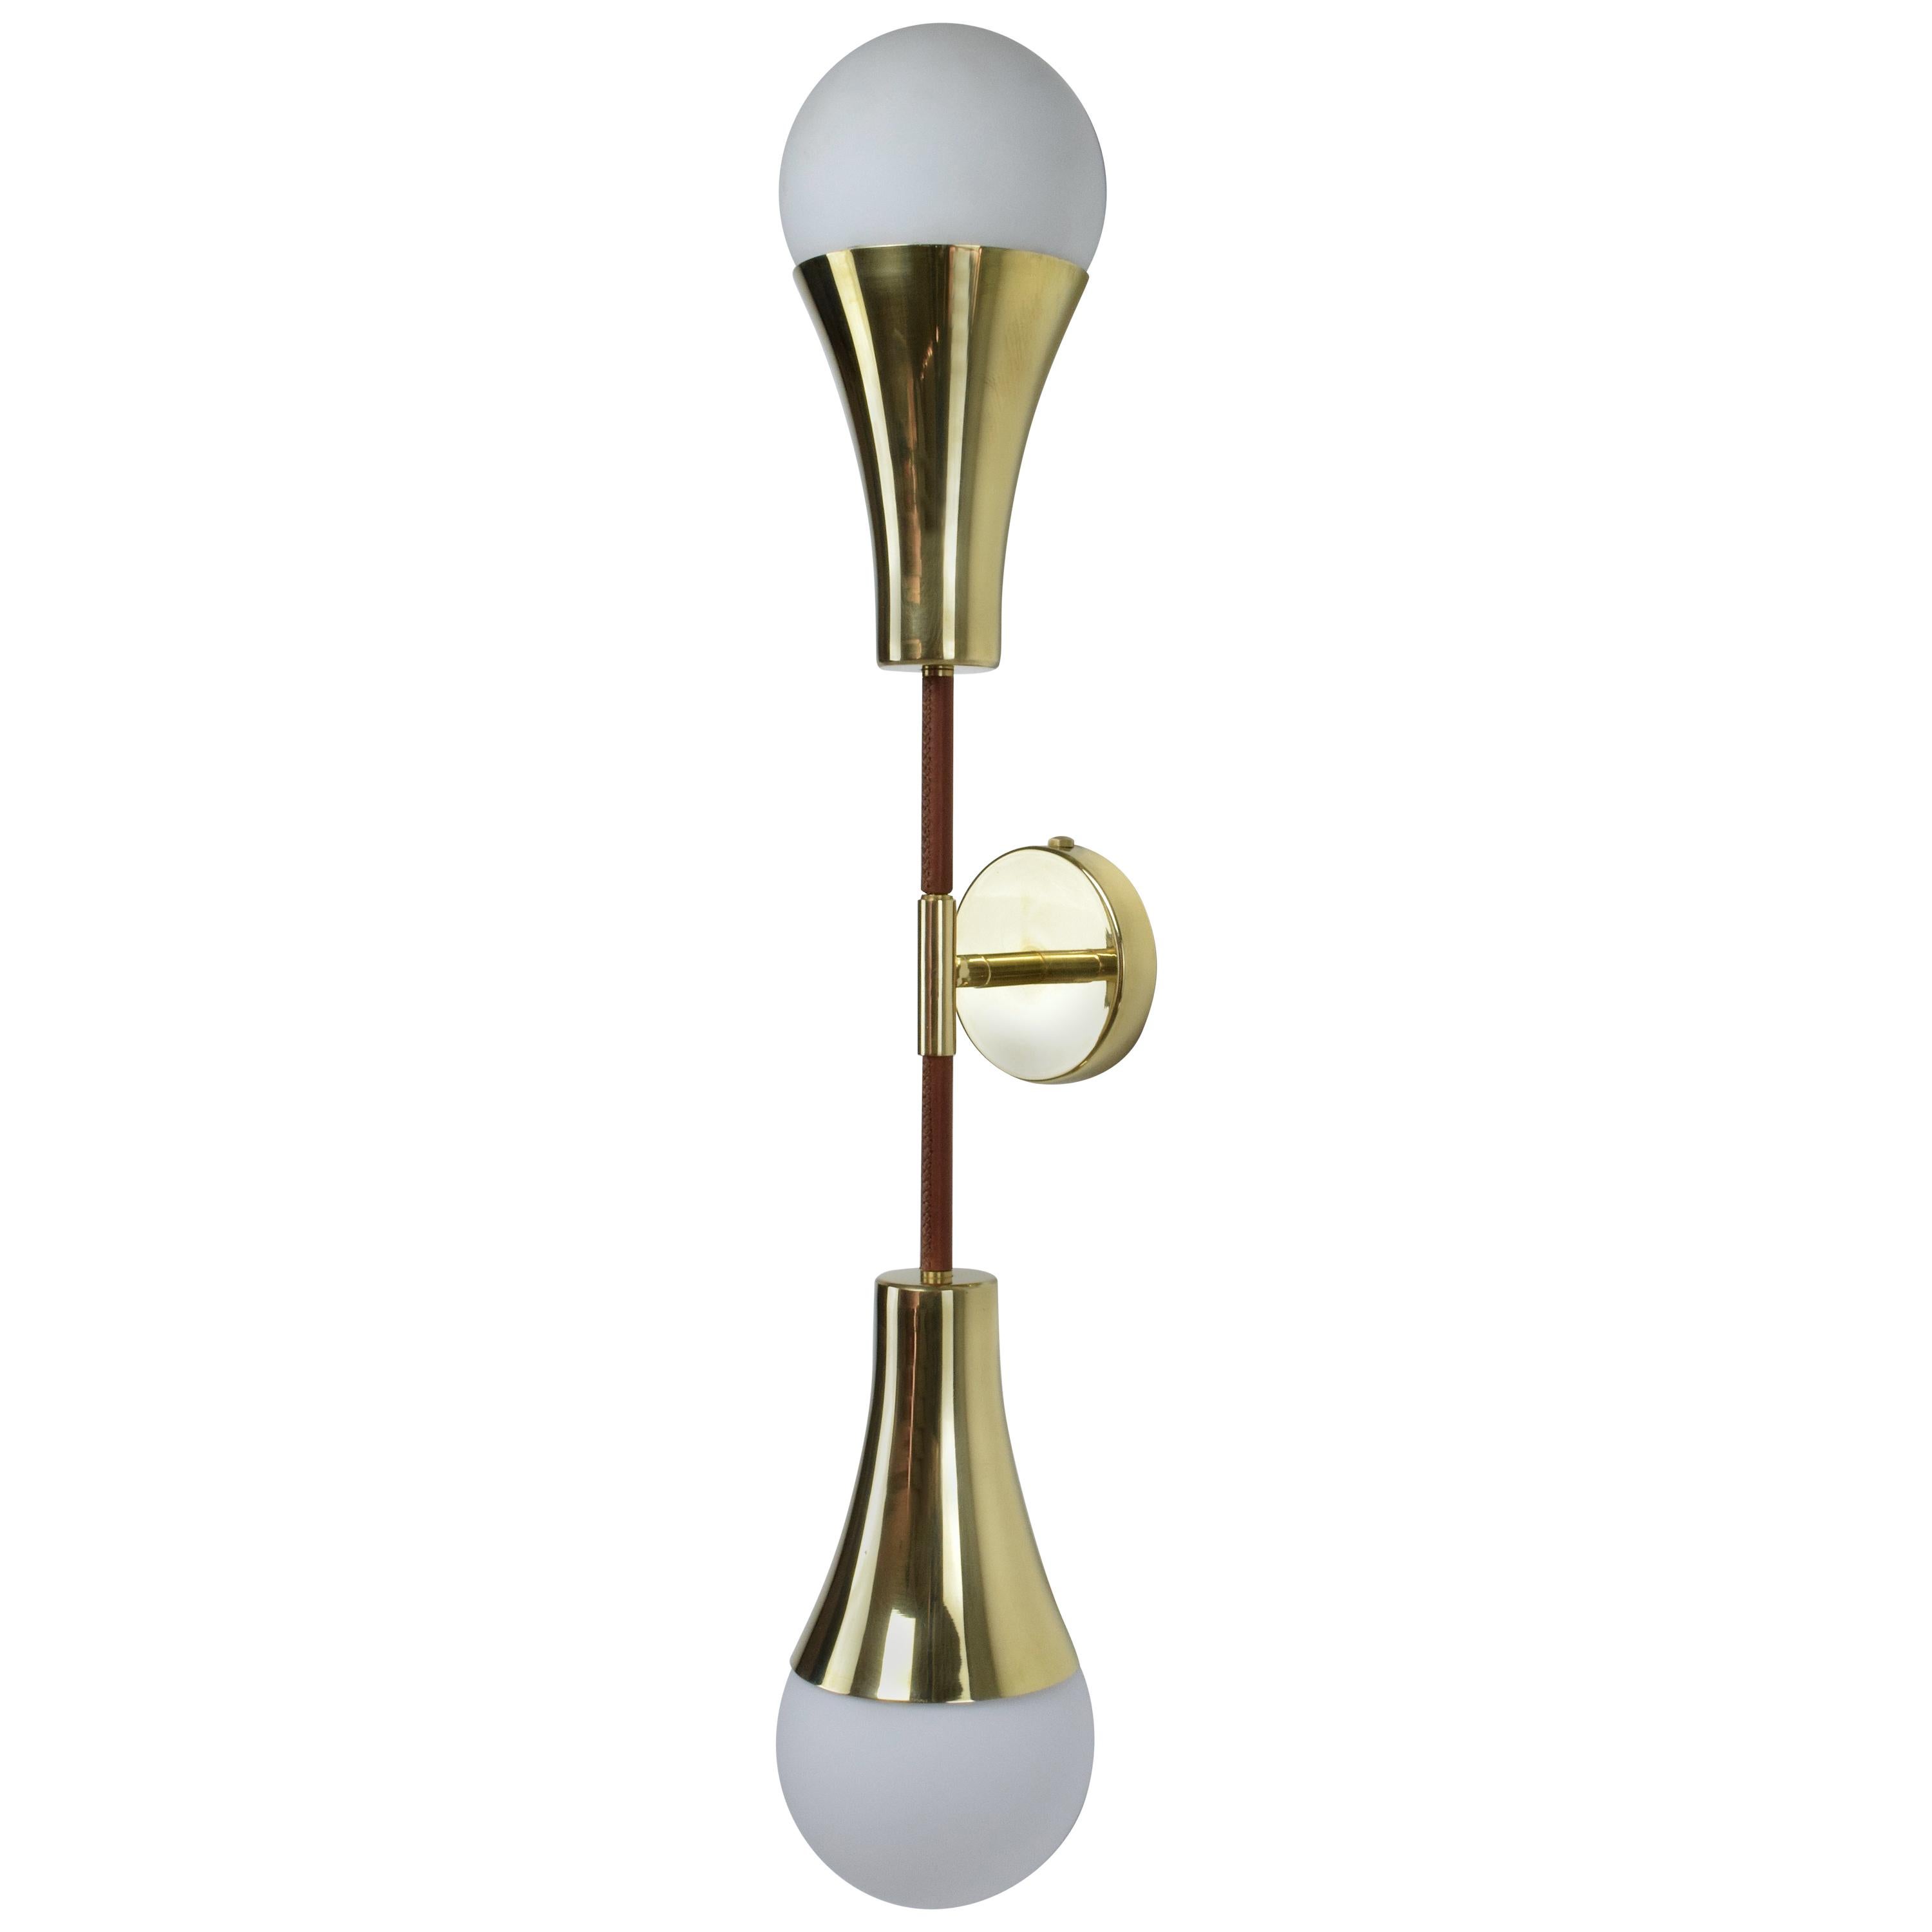 Contemporary modern handcrafted wall lamp fixture or sconce, composed of a double gold polished solid brass and opaque glass boule light shades and designed with a leather sheathed detail on both ends of the stems hand sewn by artisan saddlers. 
